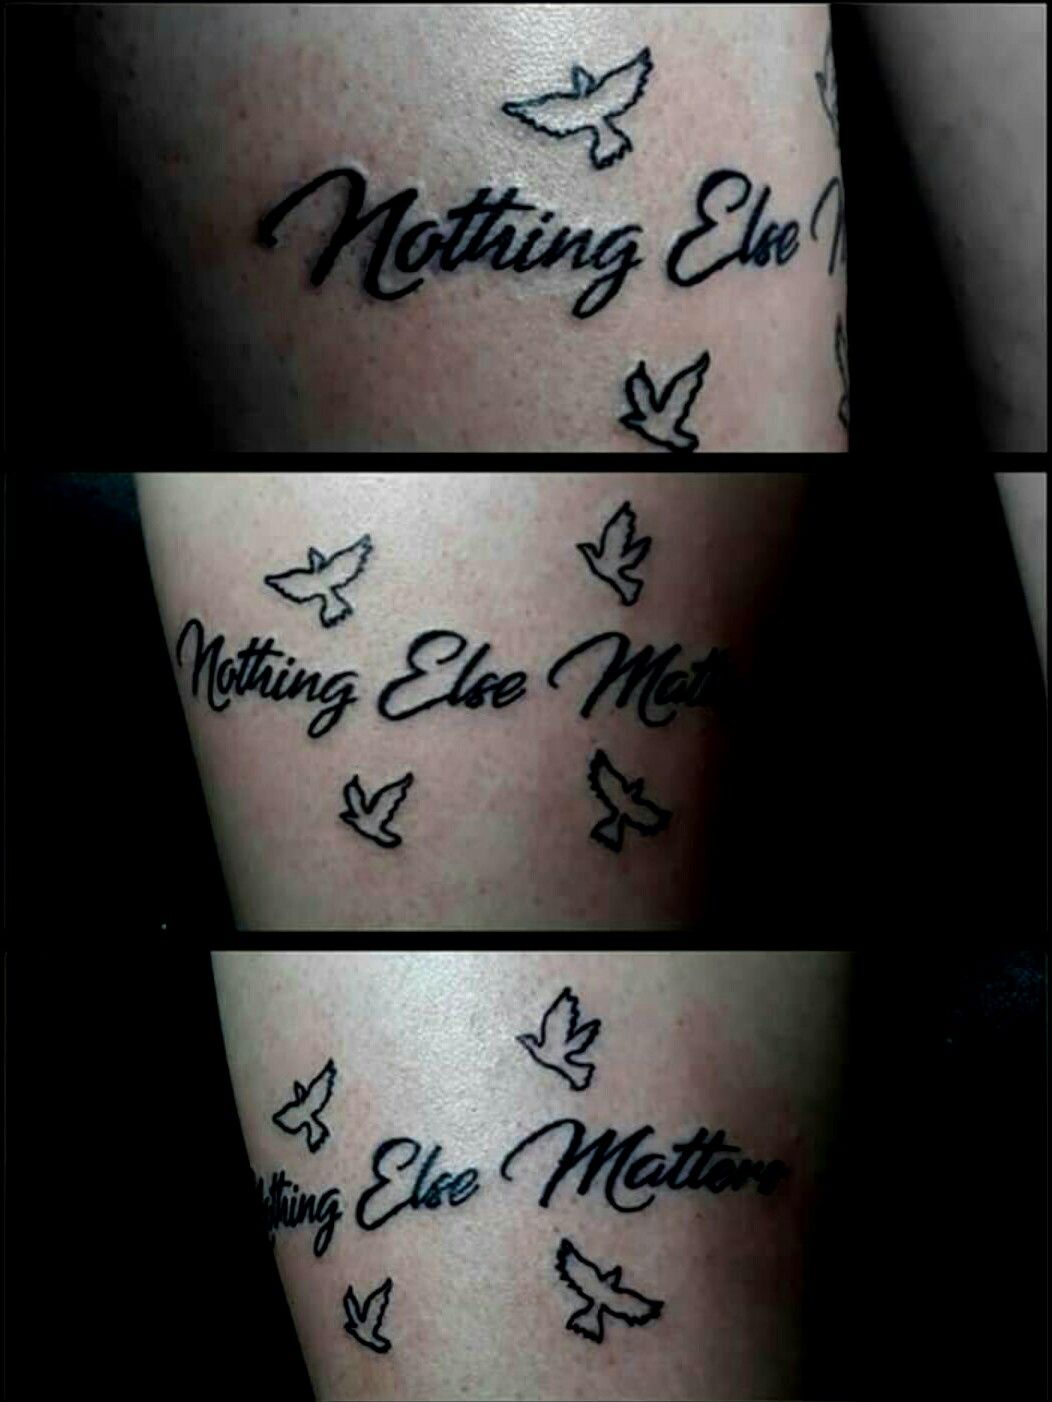 nothing else matters tattoo by NeverAlonex on DeviantArt